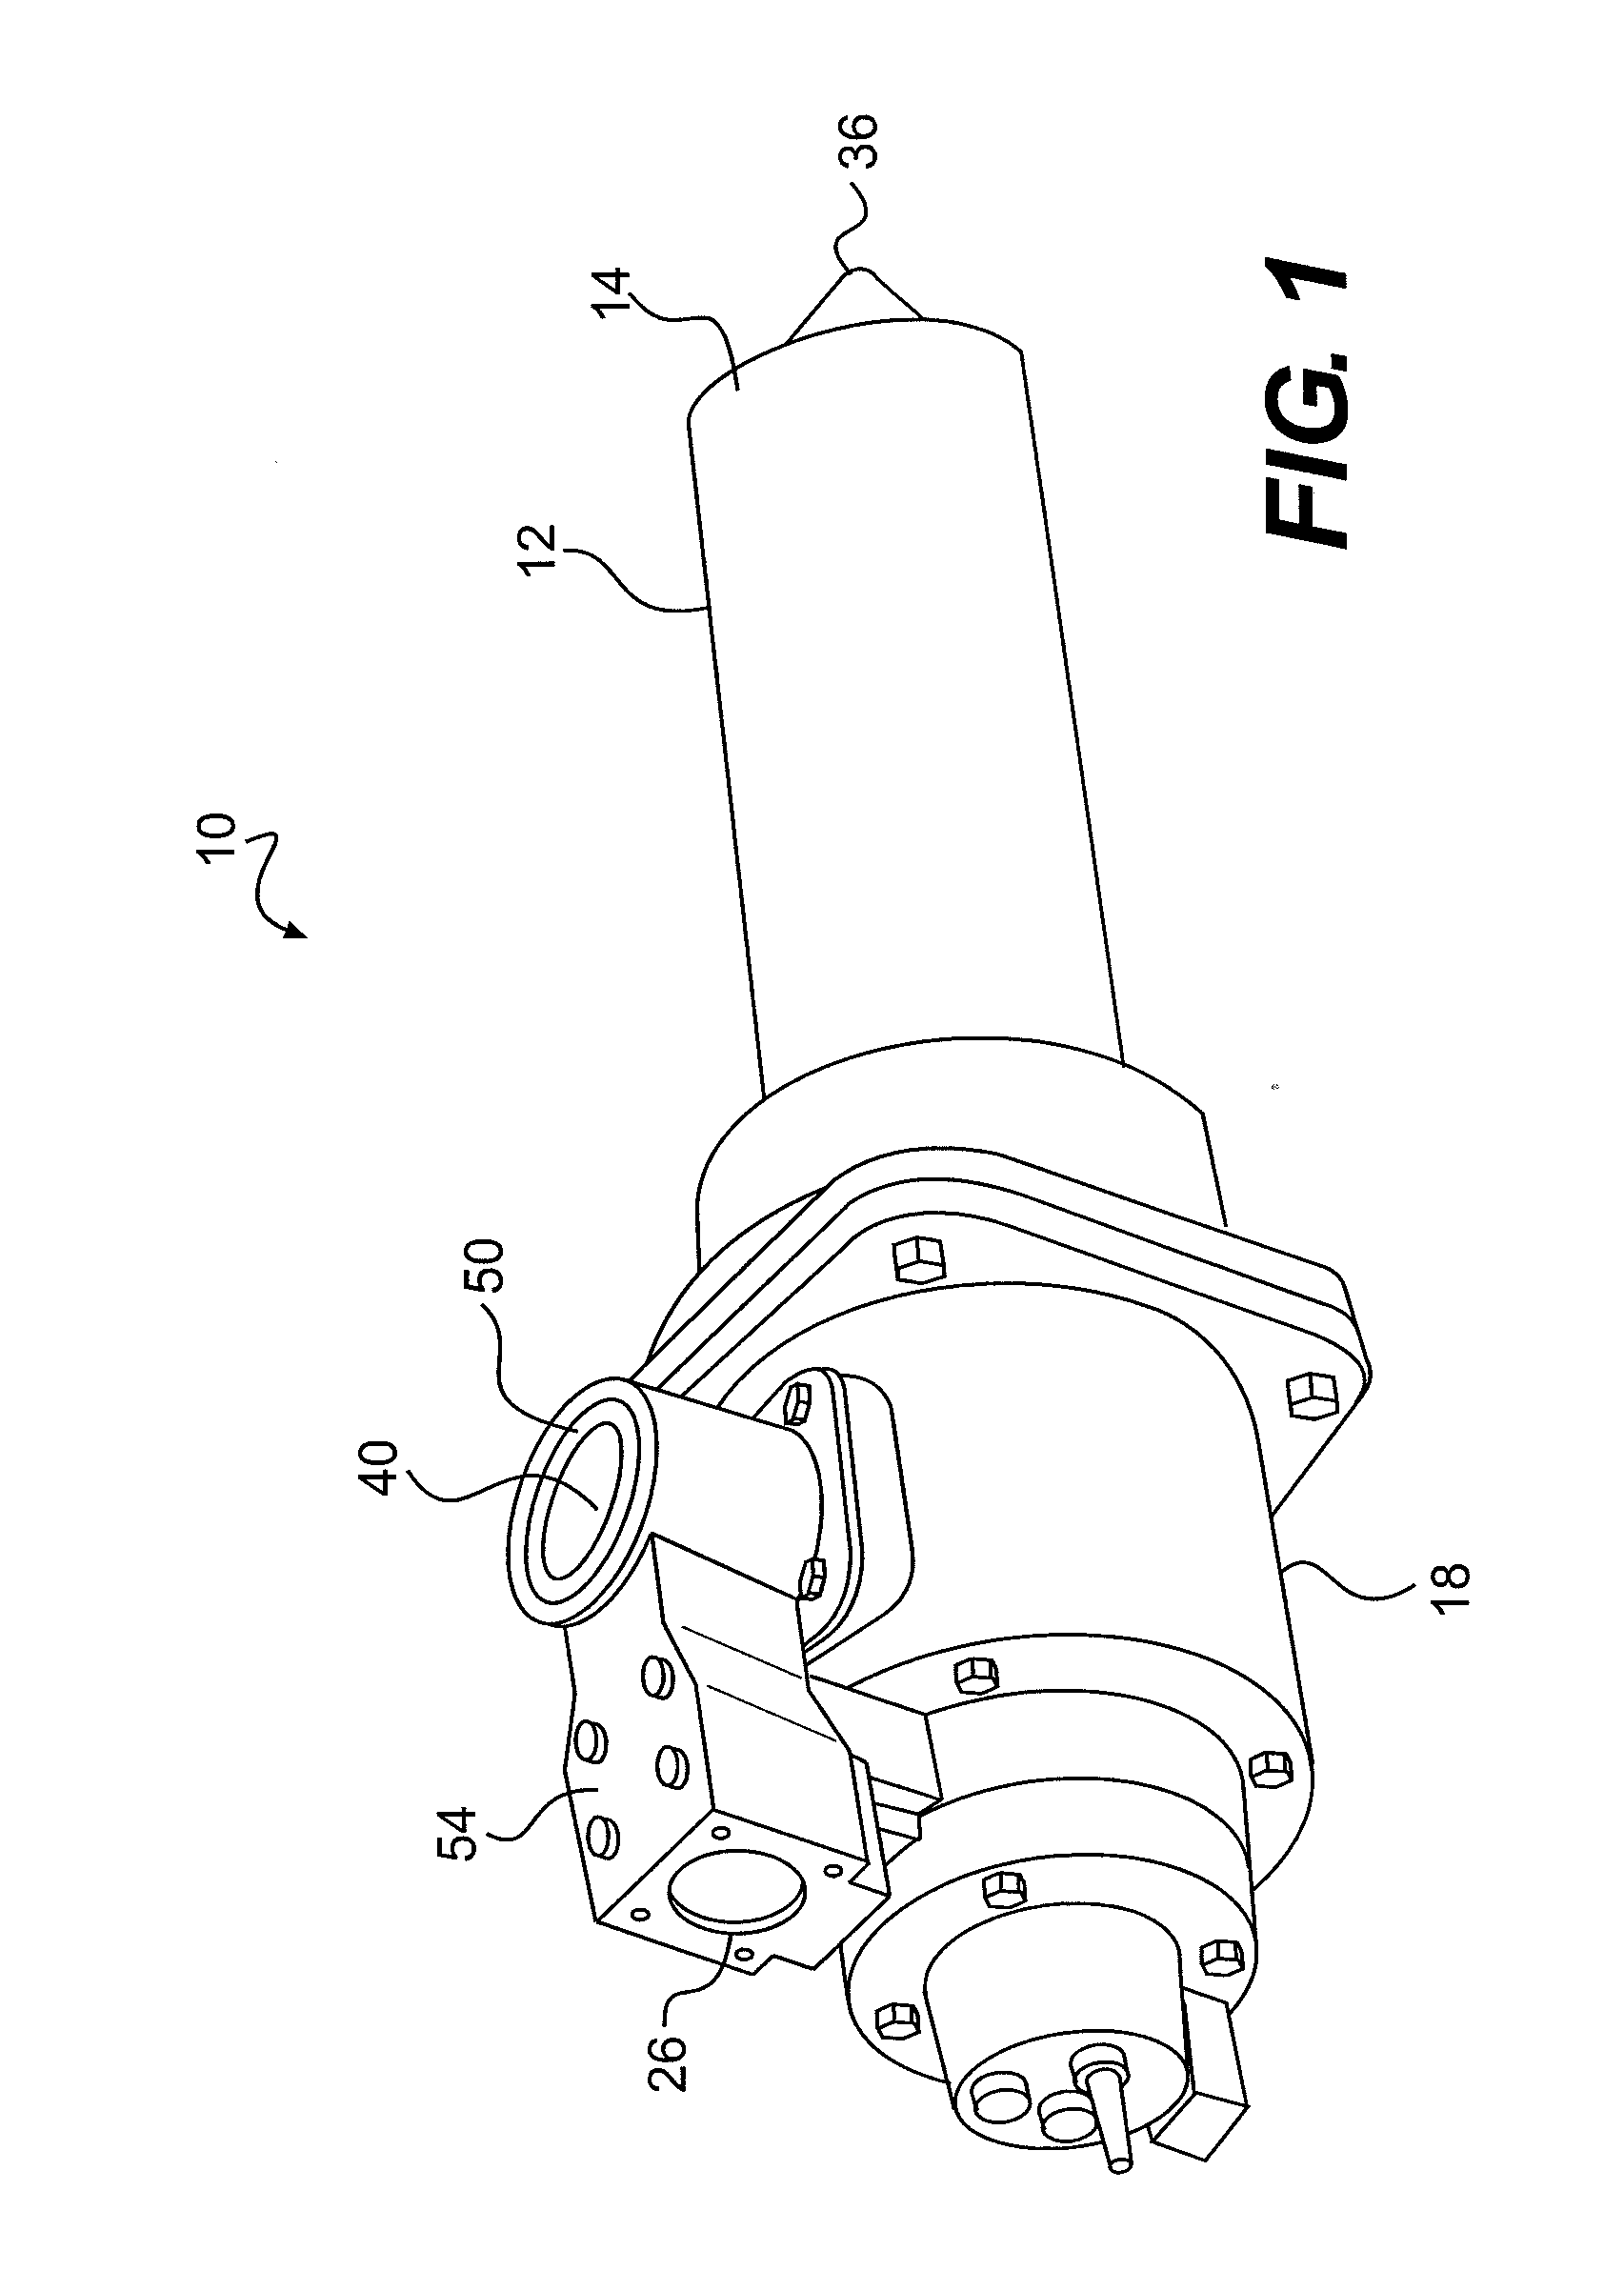 Burner with split combustion and exhaust induction air paths